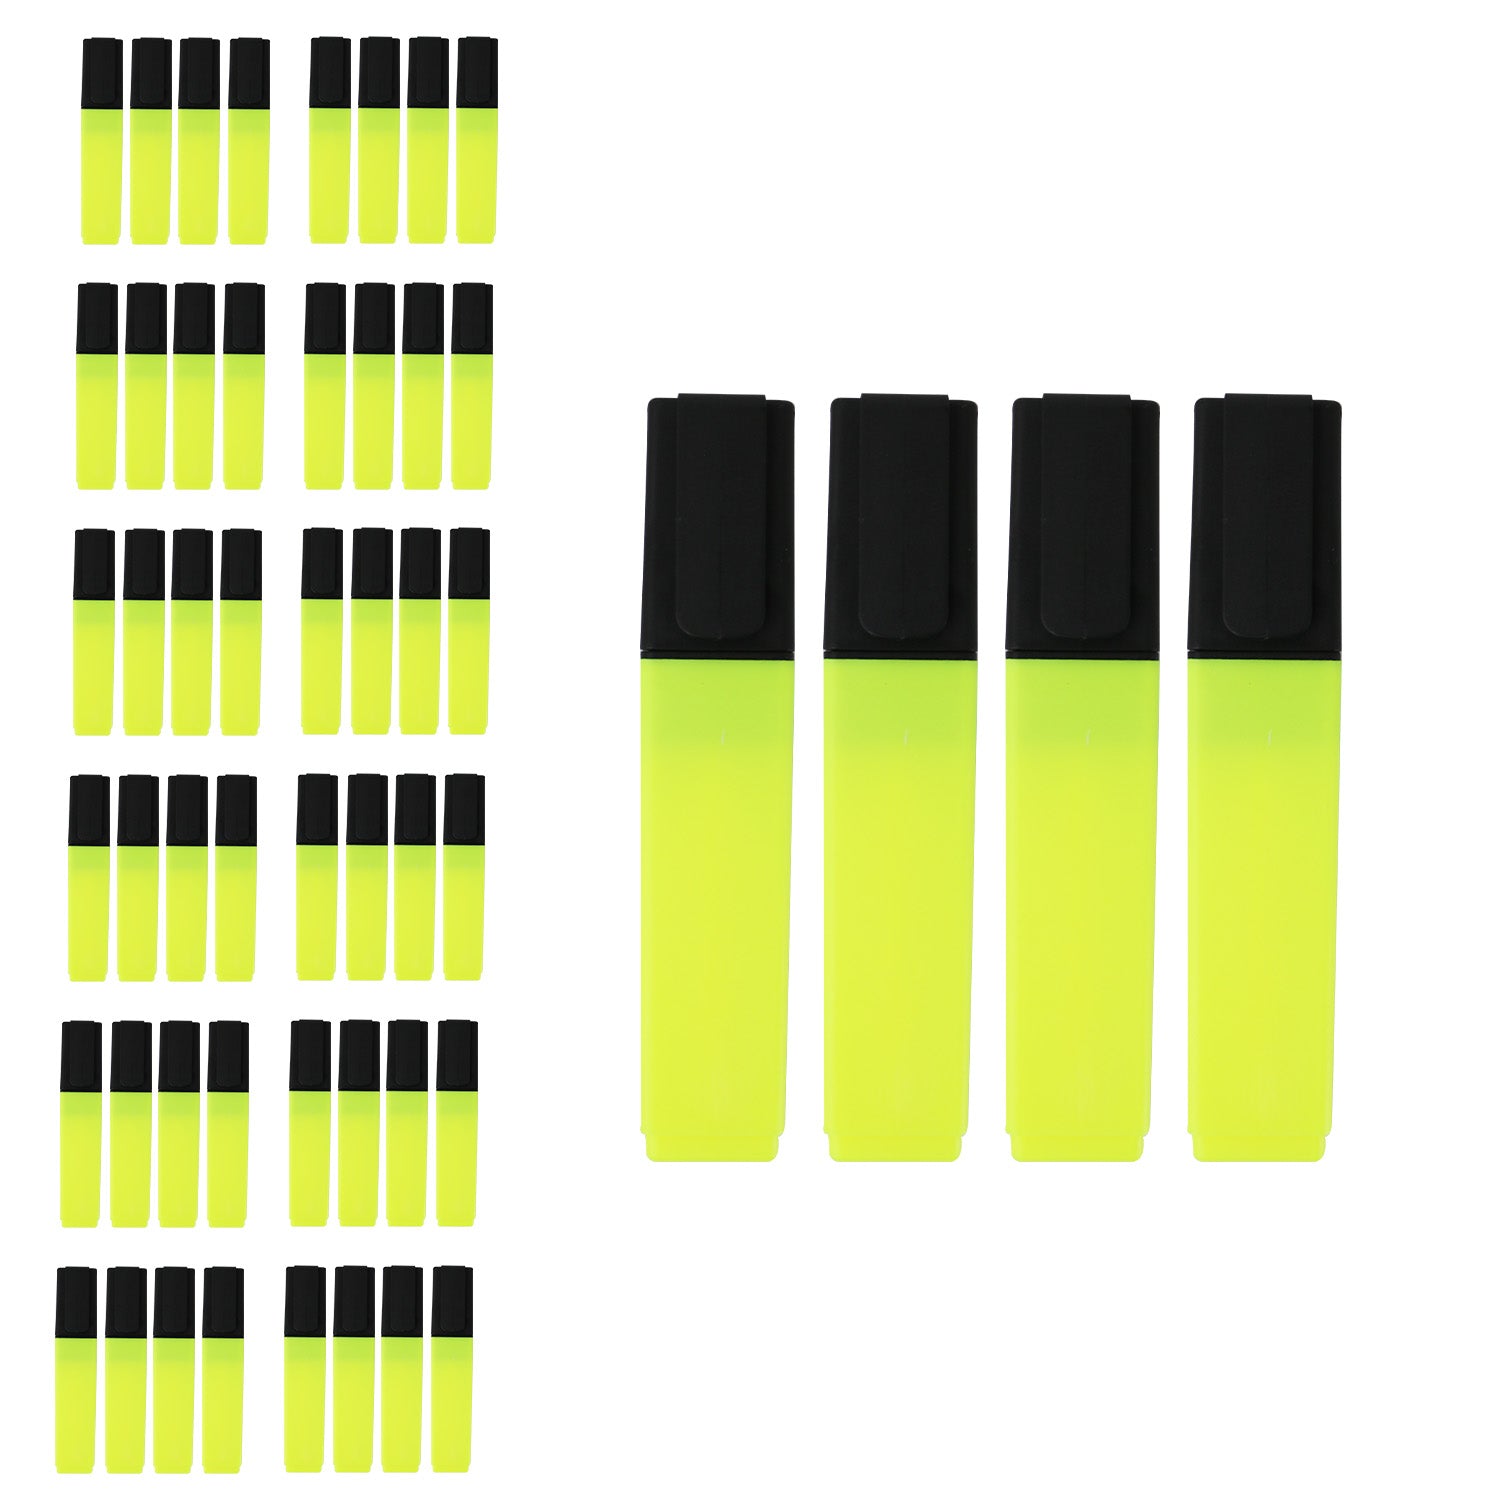 4 Pack of Yellow Highlighters - Bulk School Supplies Wholesale Case of 48 Packs of Highlighters